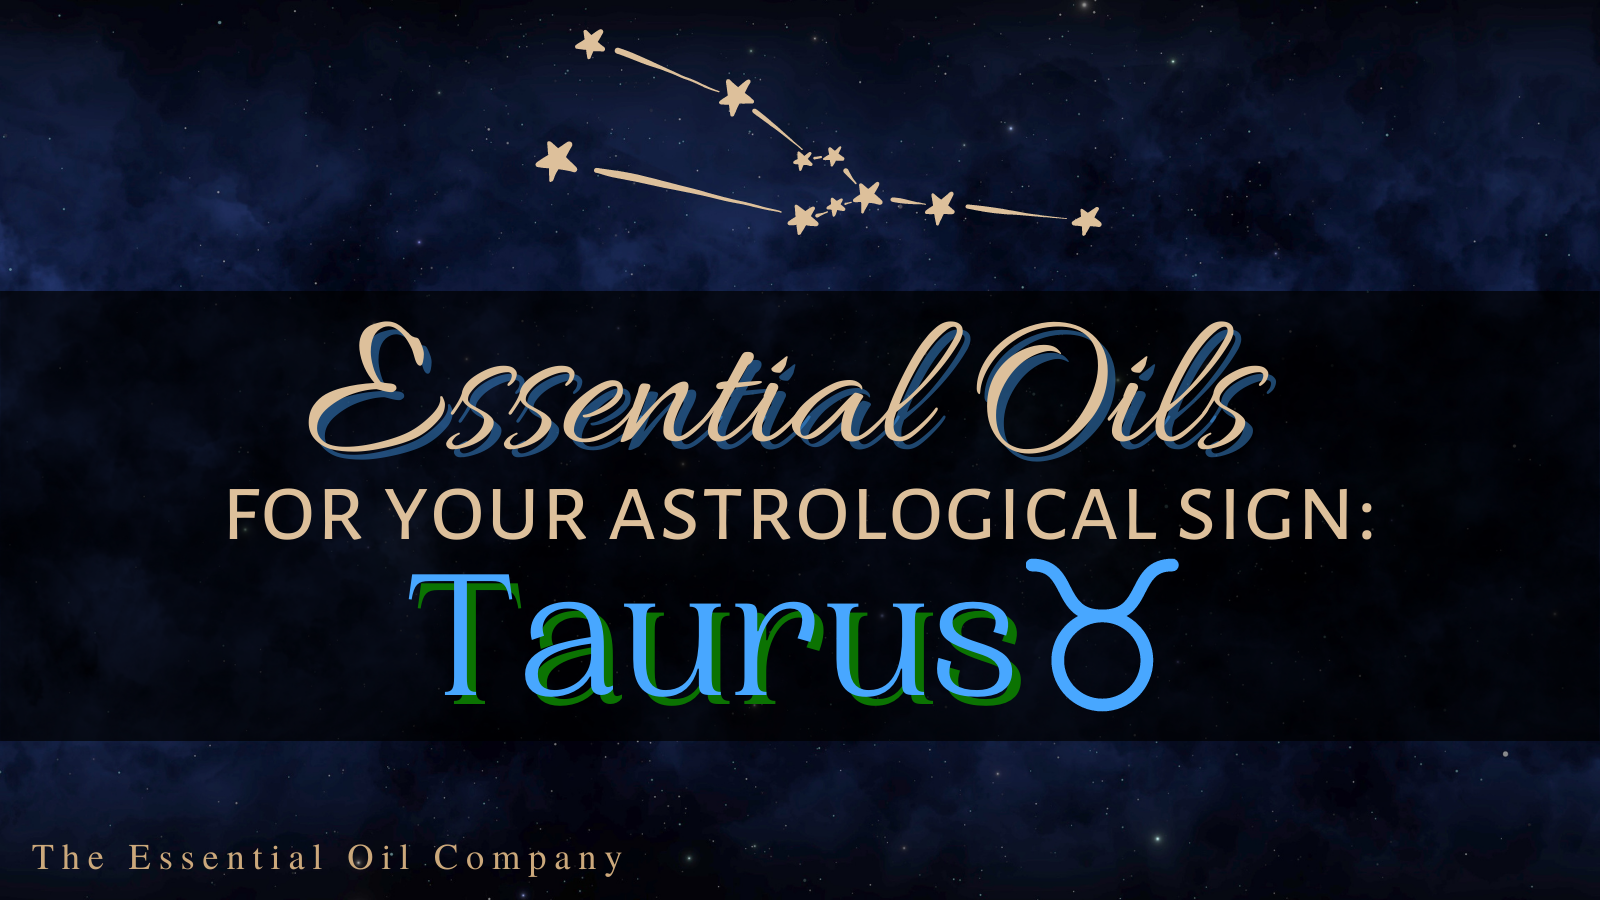 Essential Oils for Your Astrological Sign: Taurus